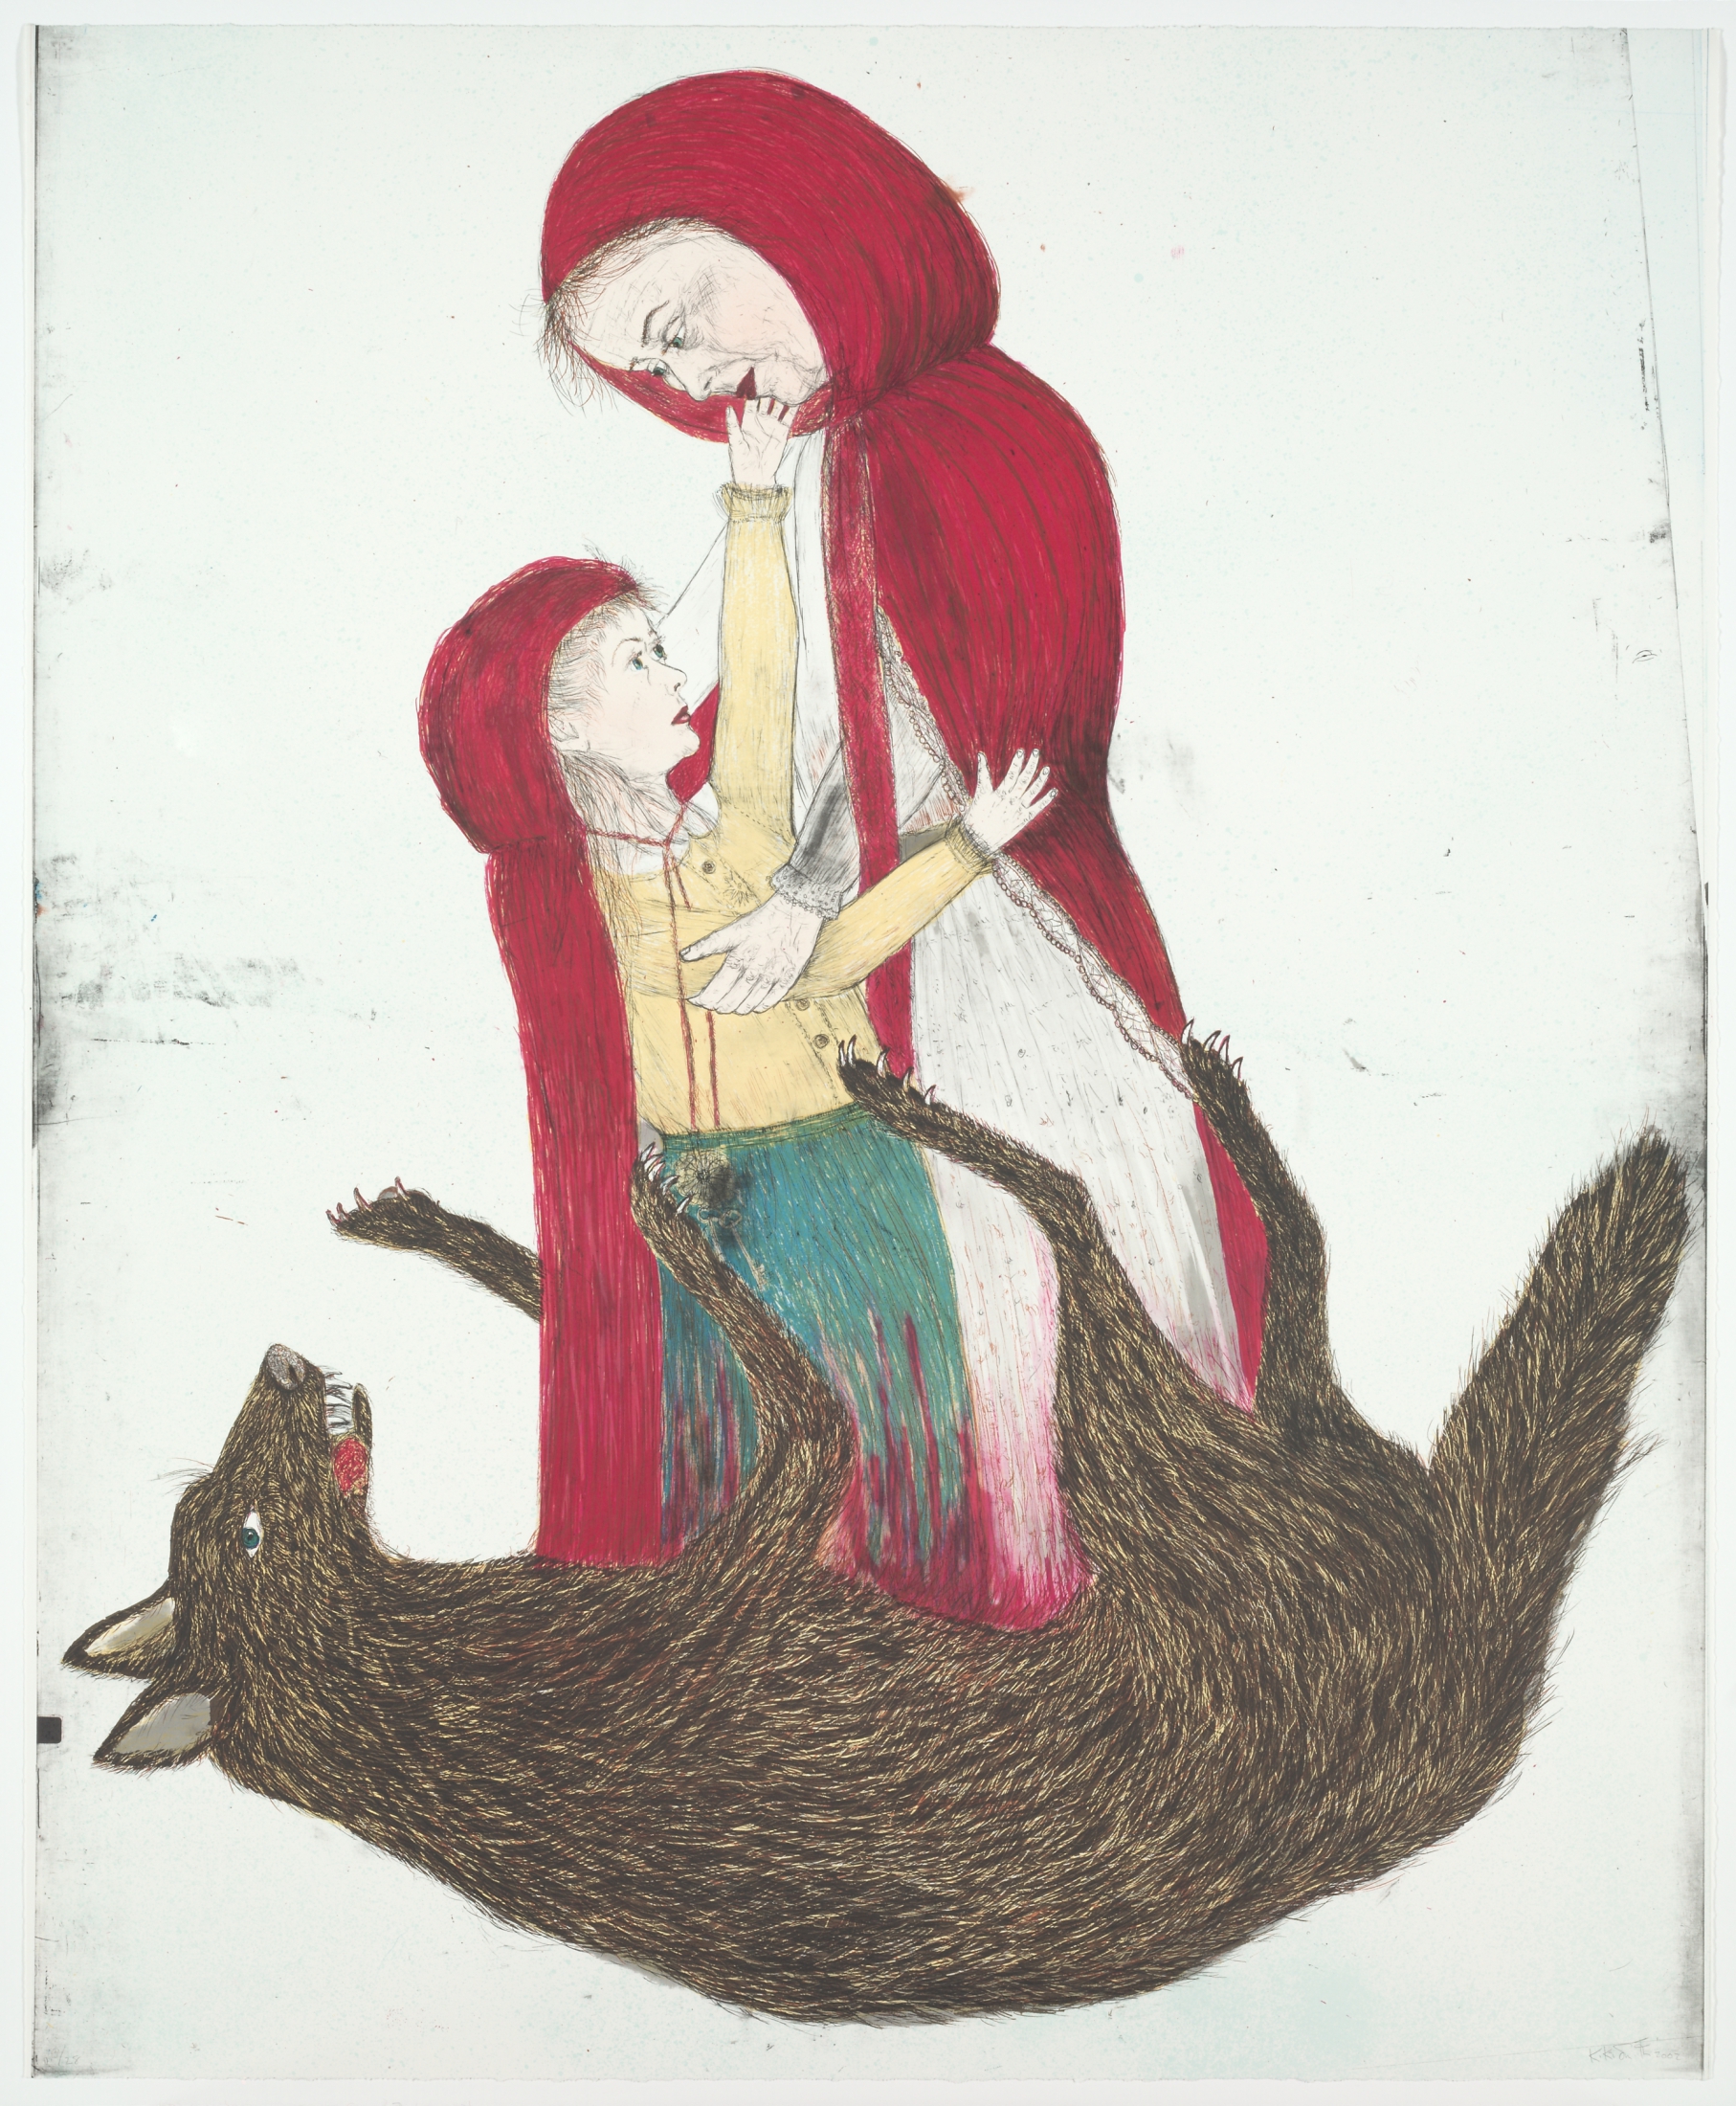 Born, 2002. Kiki Smith (American, b. 1954). Color lithograph; 172.9 x 142.5 cm. The Cleveland Museum of Art, Gift of Agnes Gund and Daniel Shapiro 2004.34.